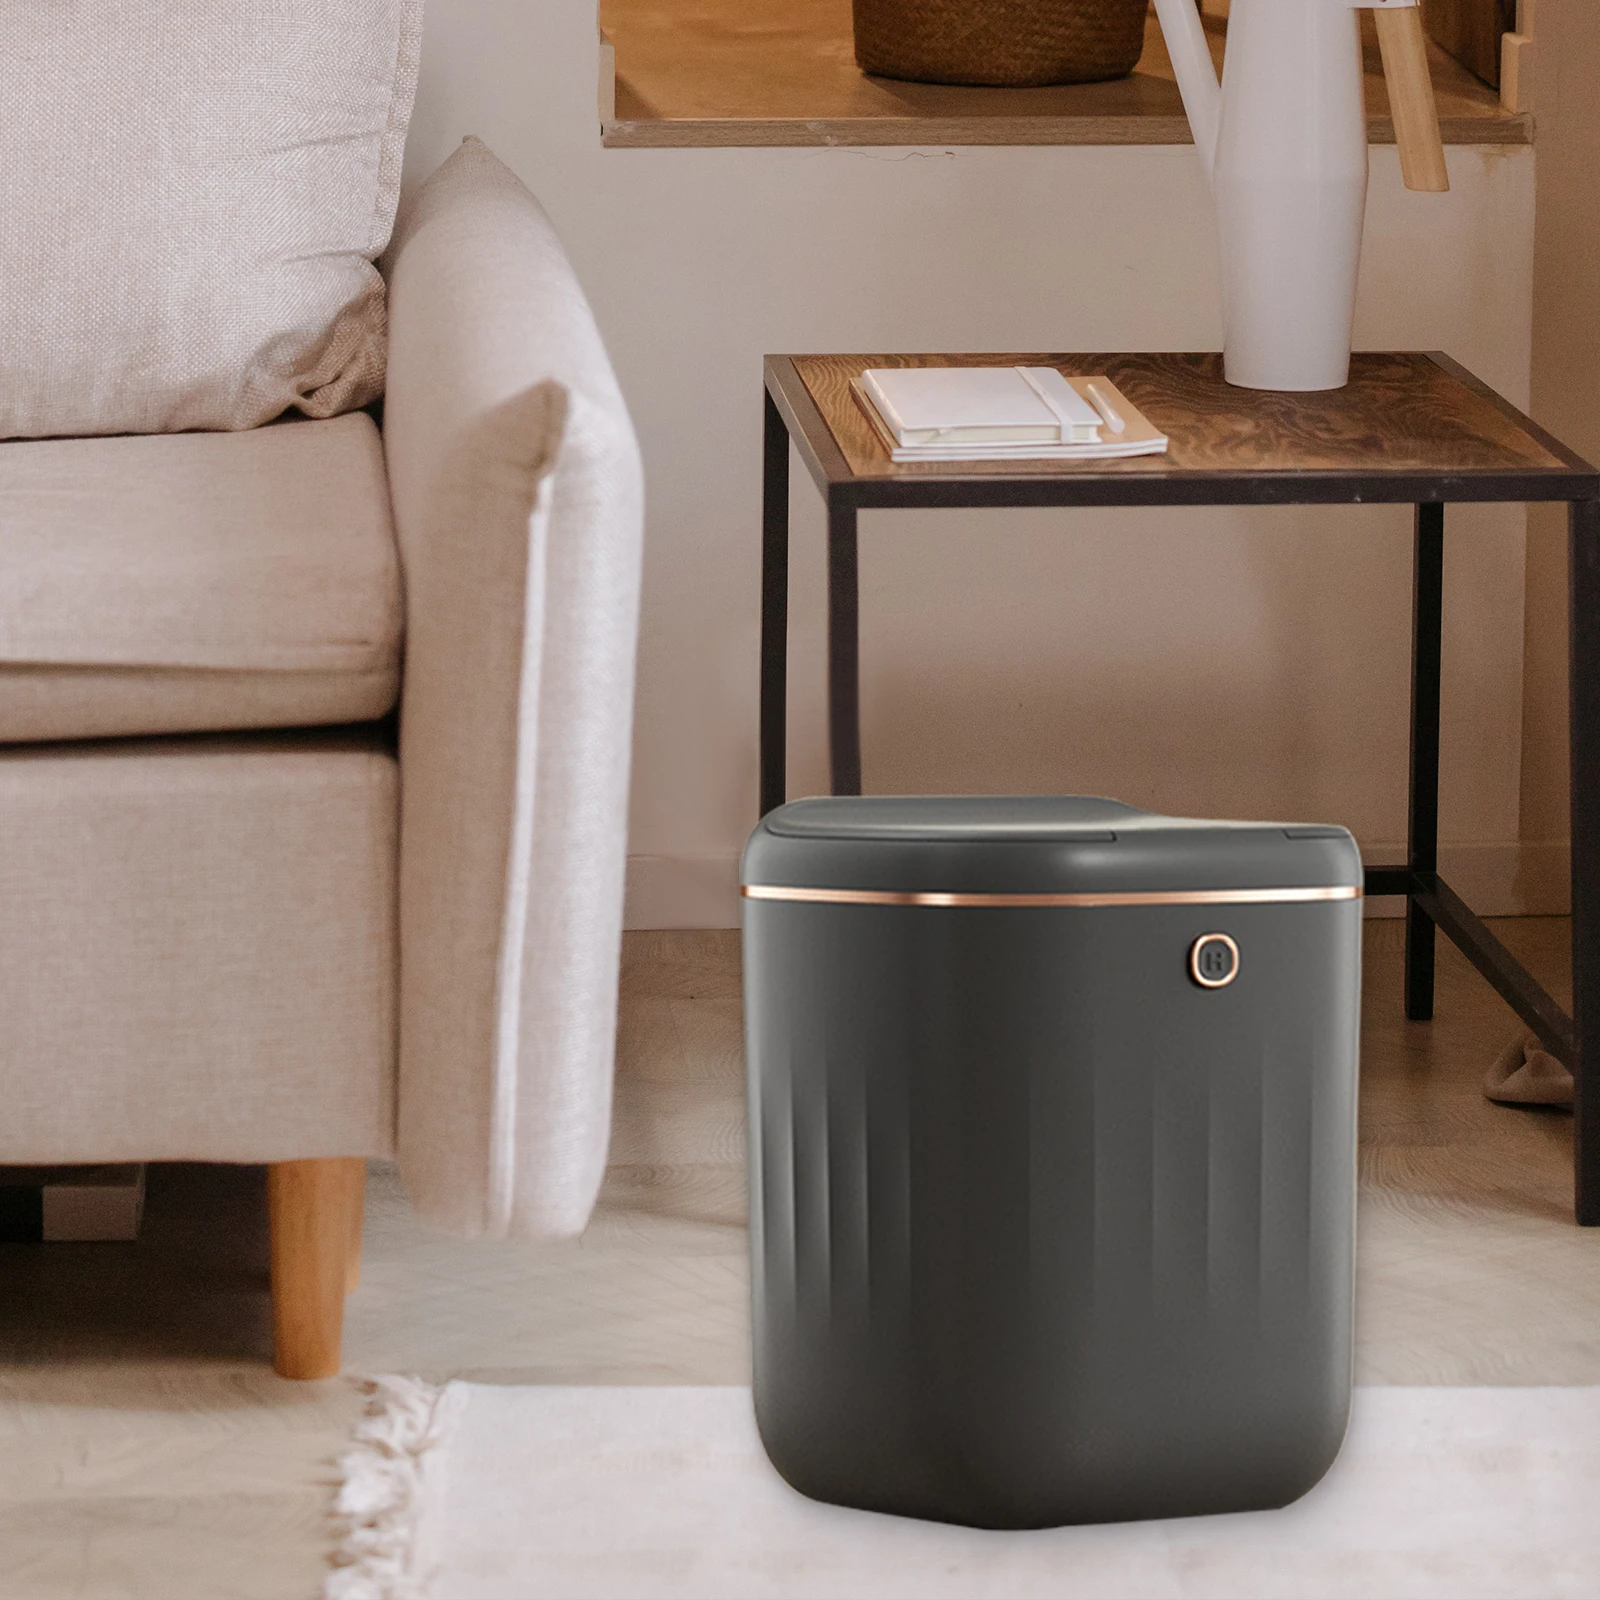 20/22/24L Smart Trash Can Large Capacity Automatic Waterproof Trash Bin for Bathroom Living Room Kitchen Smart Home